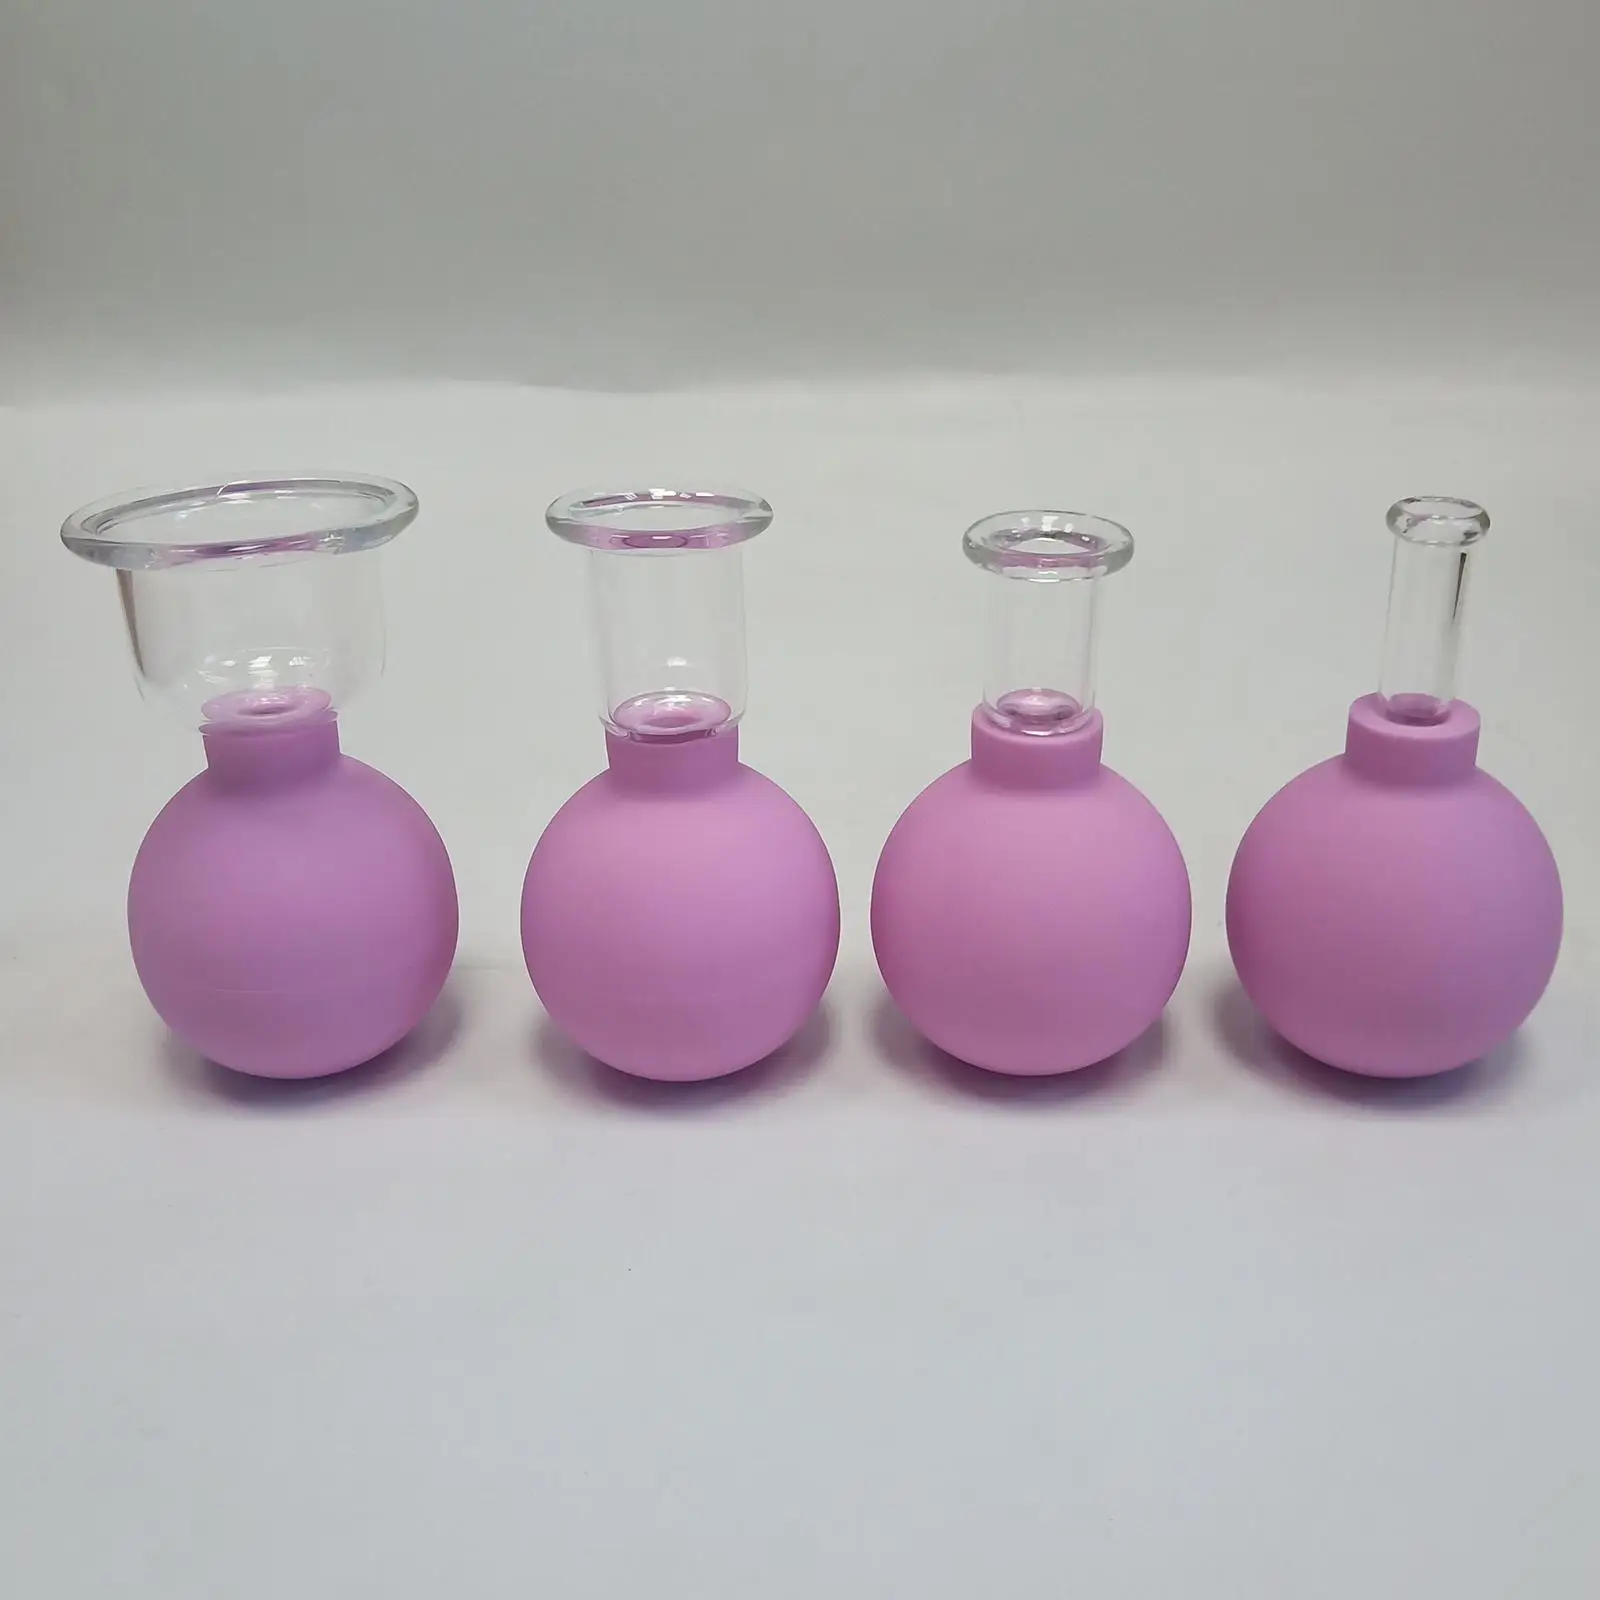 4 Pieces Glass Silicone  Comfort Safety Professional Vacuum Cupping for Massage Body Arm Body Leg Arm 